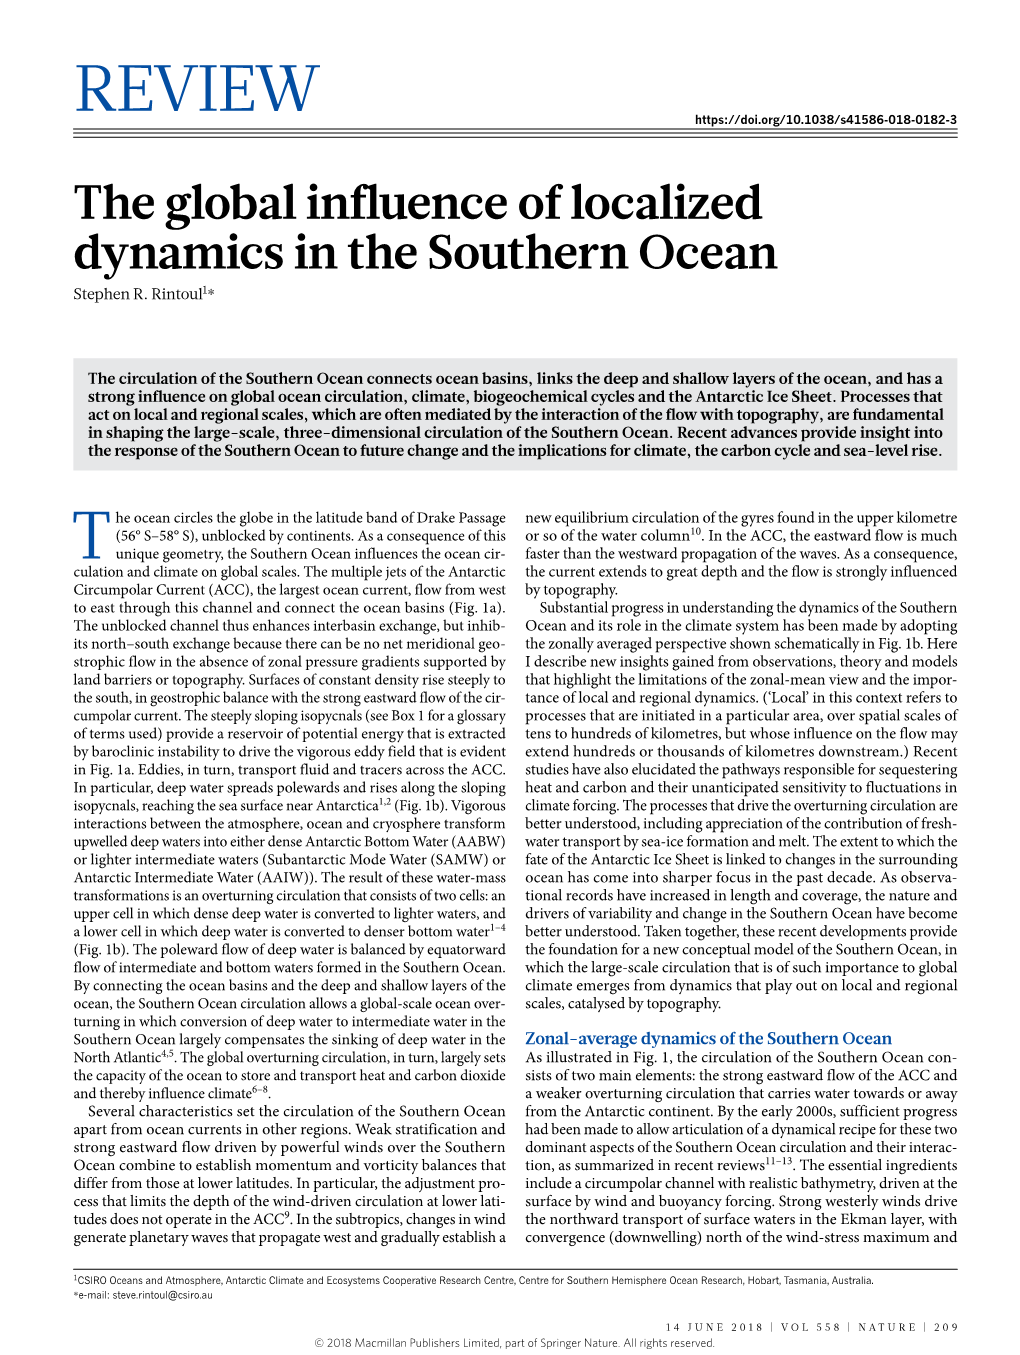 The Global Influence of Localized Dynamics in the Southern Ocean Stephen R